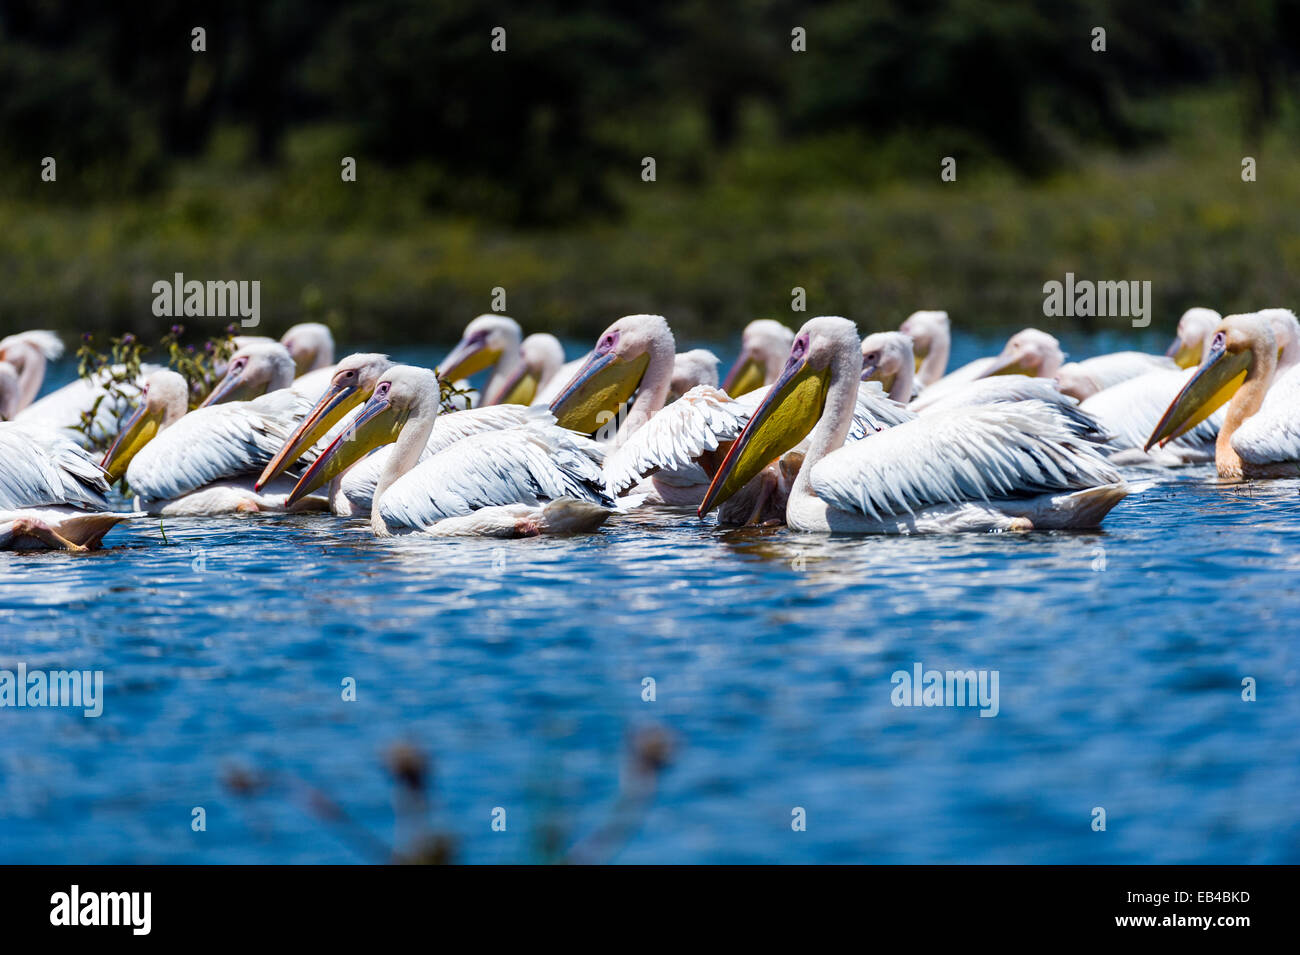 A flock of great white pelicans swimming on the surface of a flooded freshwater lake. Stock Photo